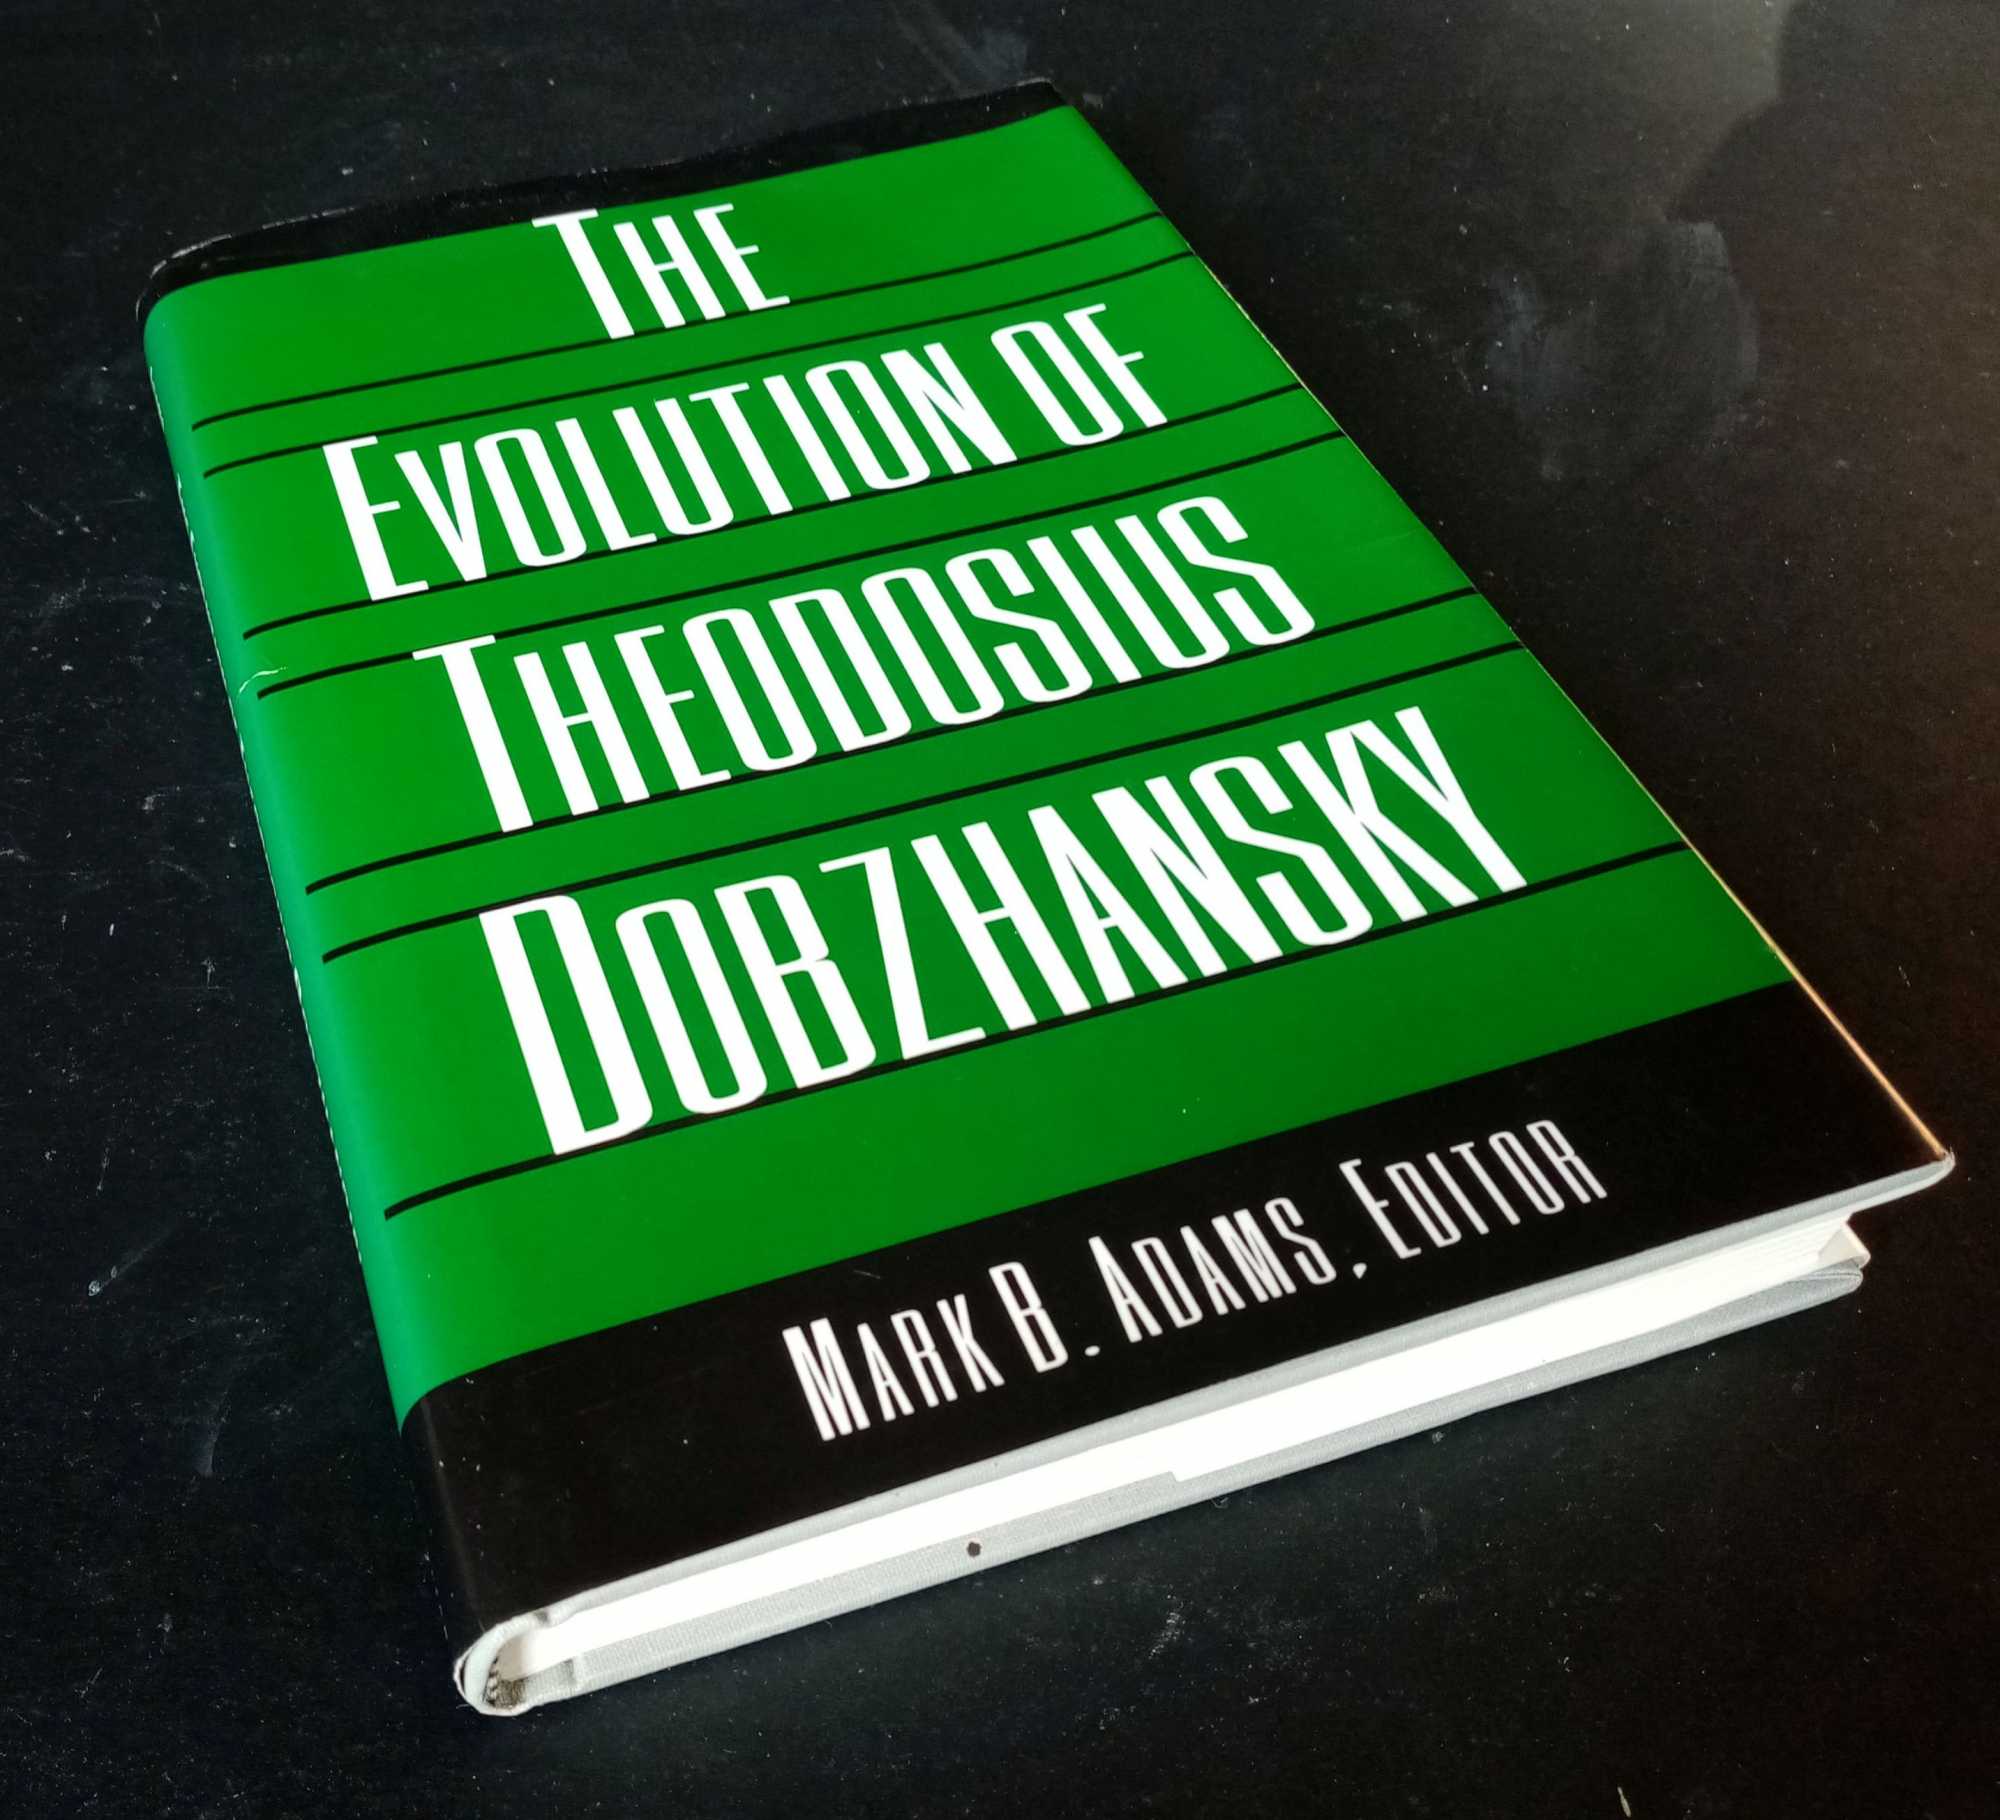 Mark Adams, ed. - The Evolution of Theodosius Dobzhansky: Essays on His Life and Thought in Russia and America